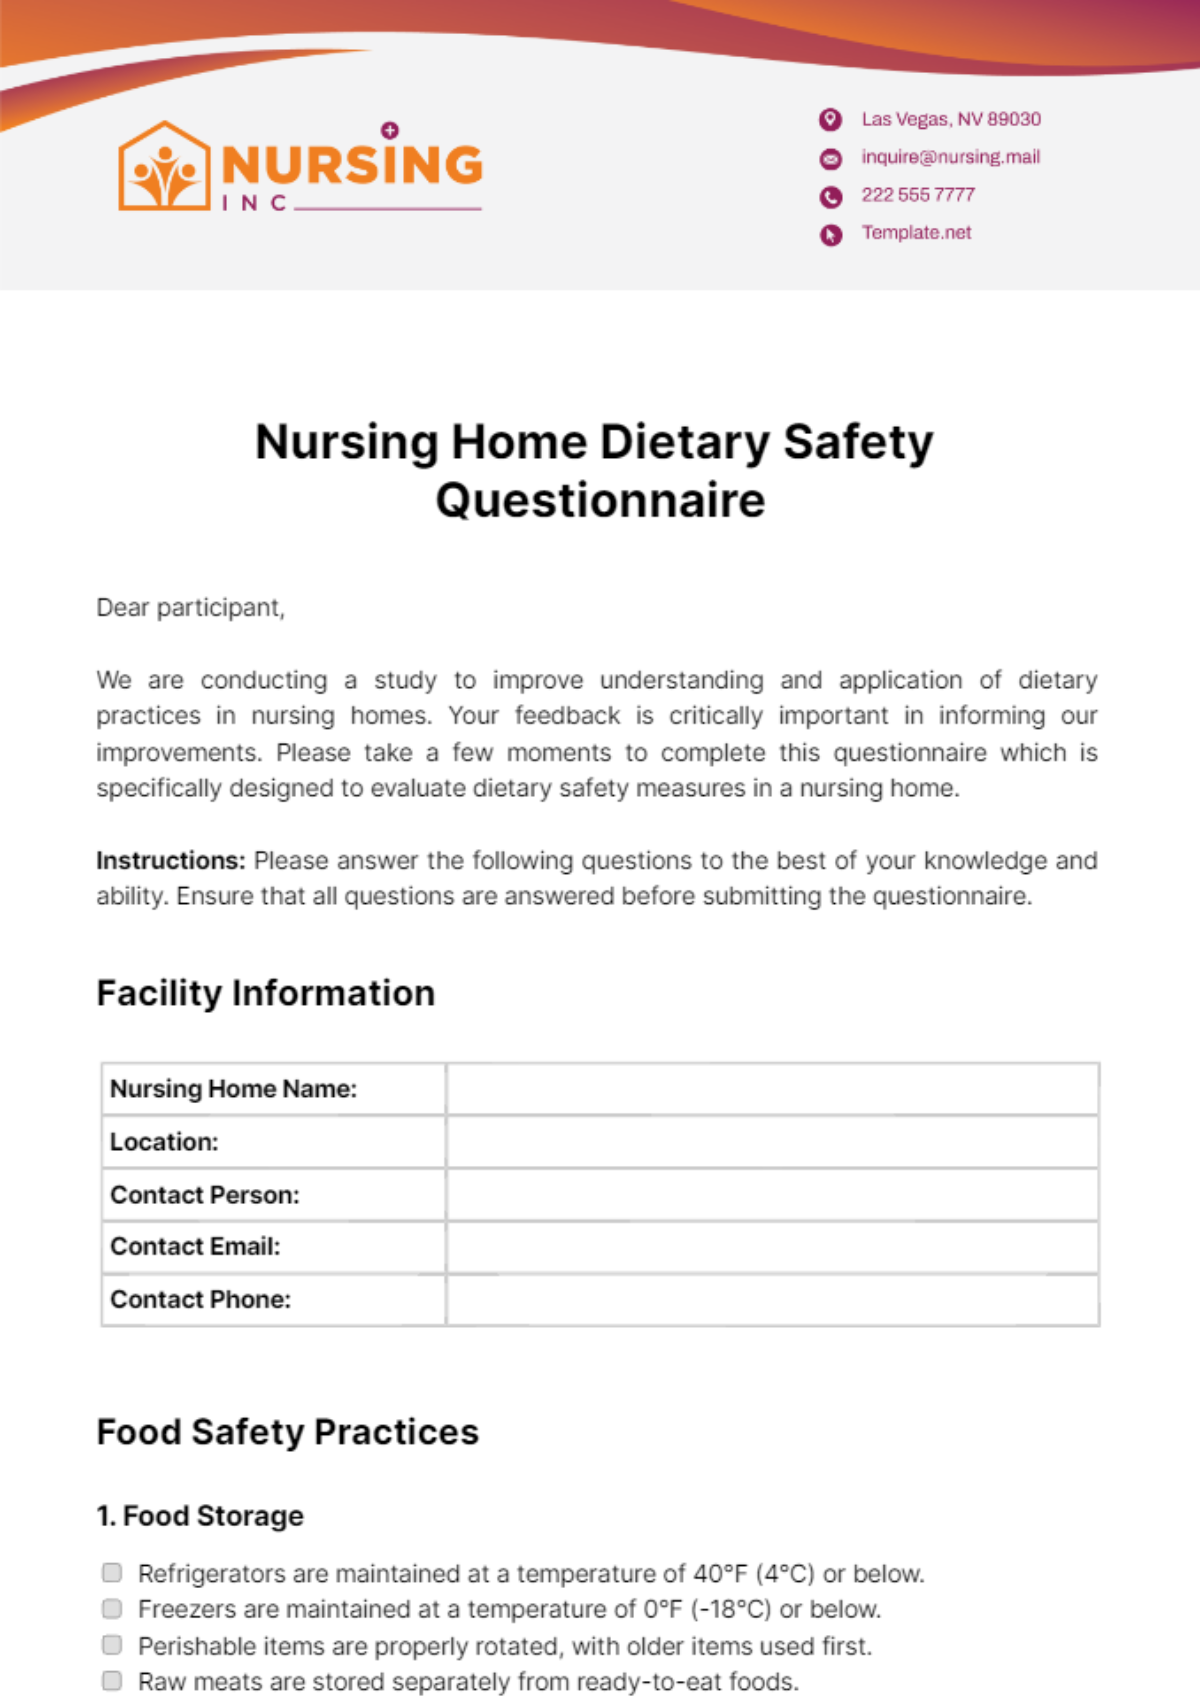 Nursing Home Dietary Safety Questionnaire Template